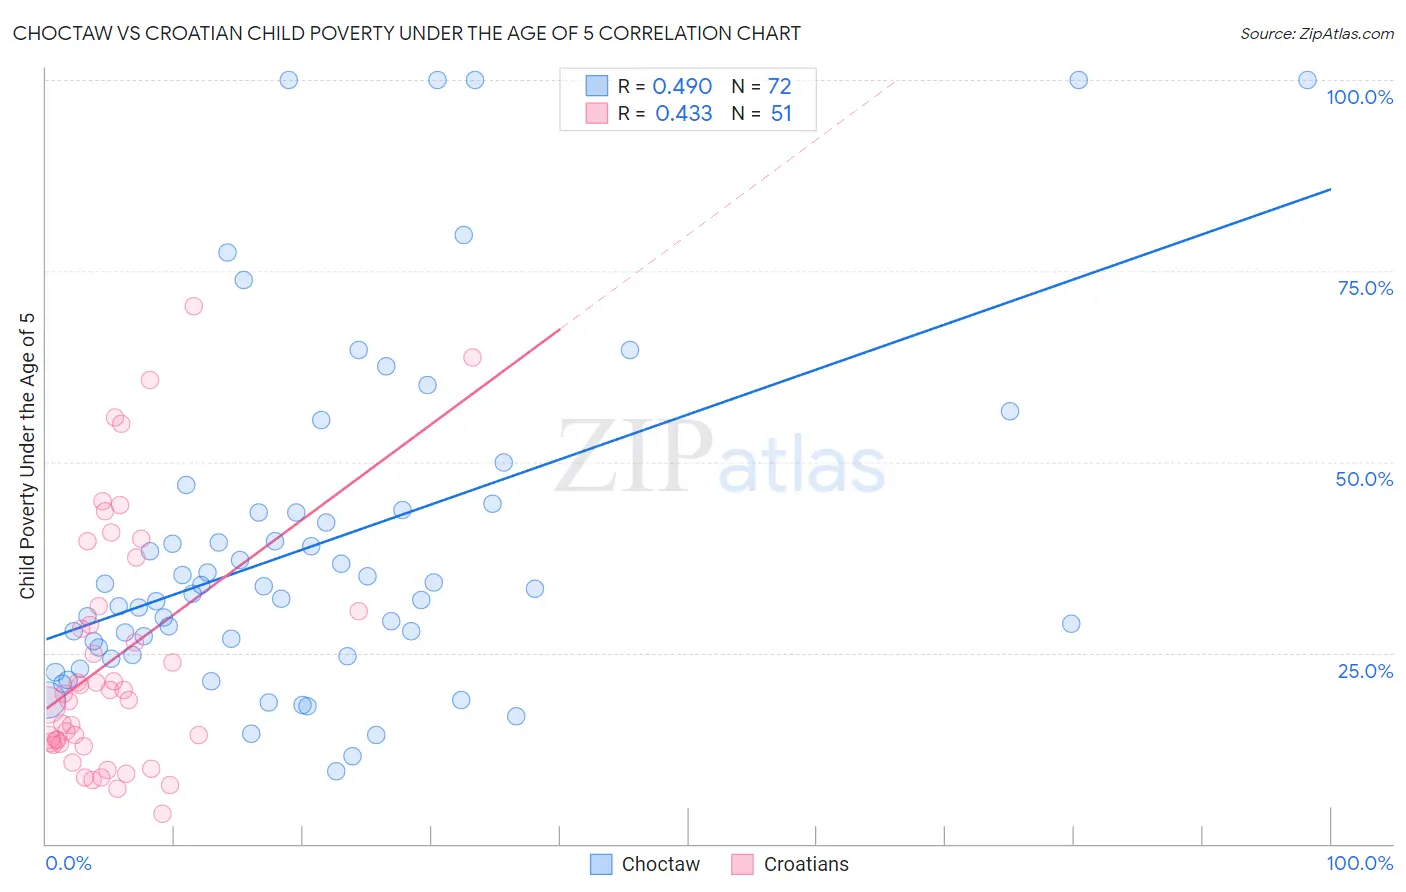 Choctaw vs Croatian Child Poverty Under the Age of 5